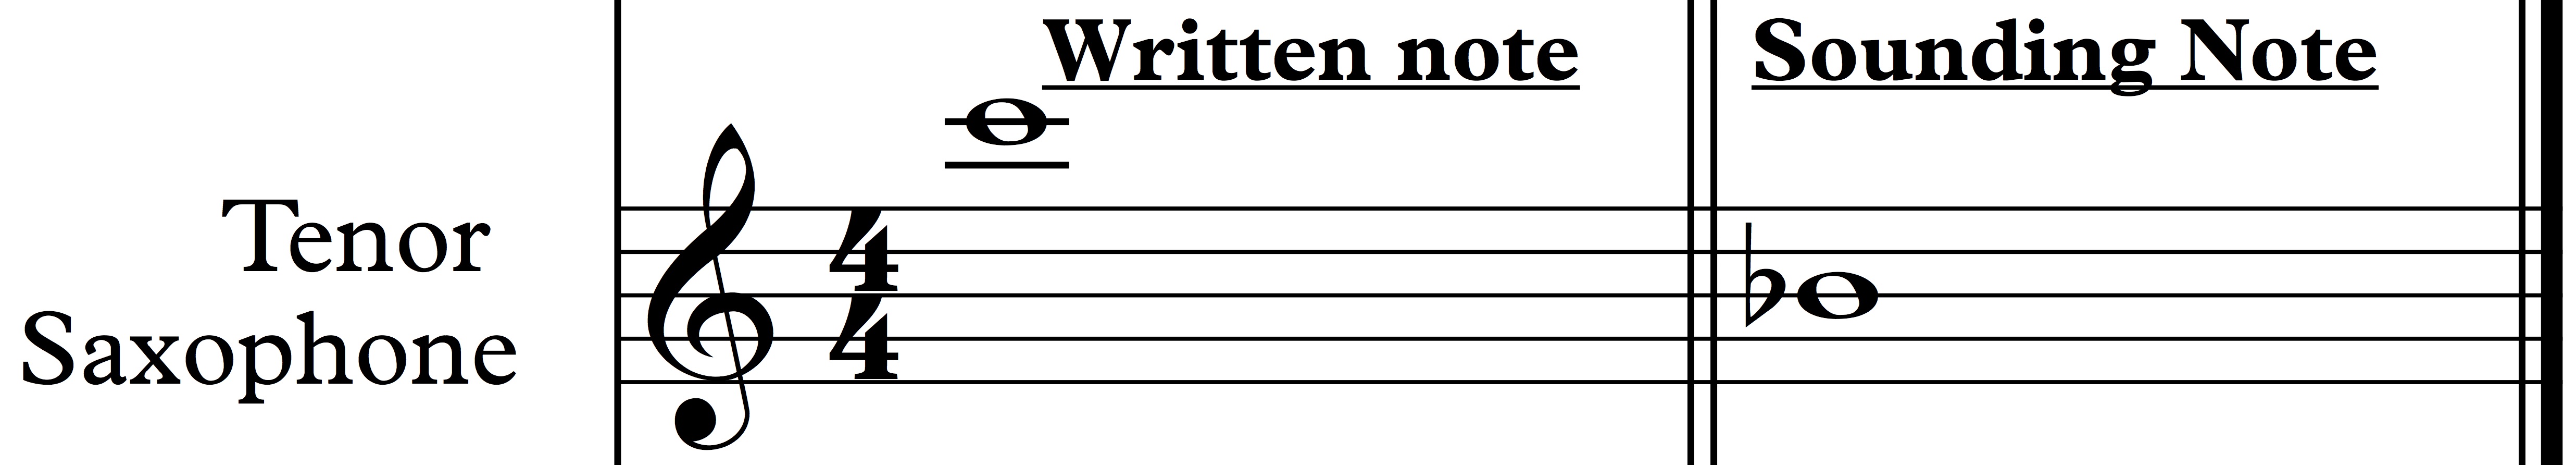 Concert Pitch Transposition Chart and Flashcards